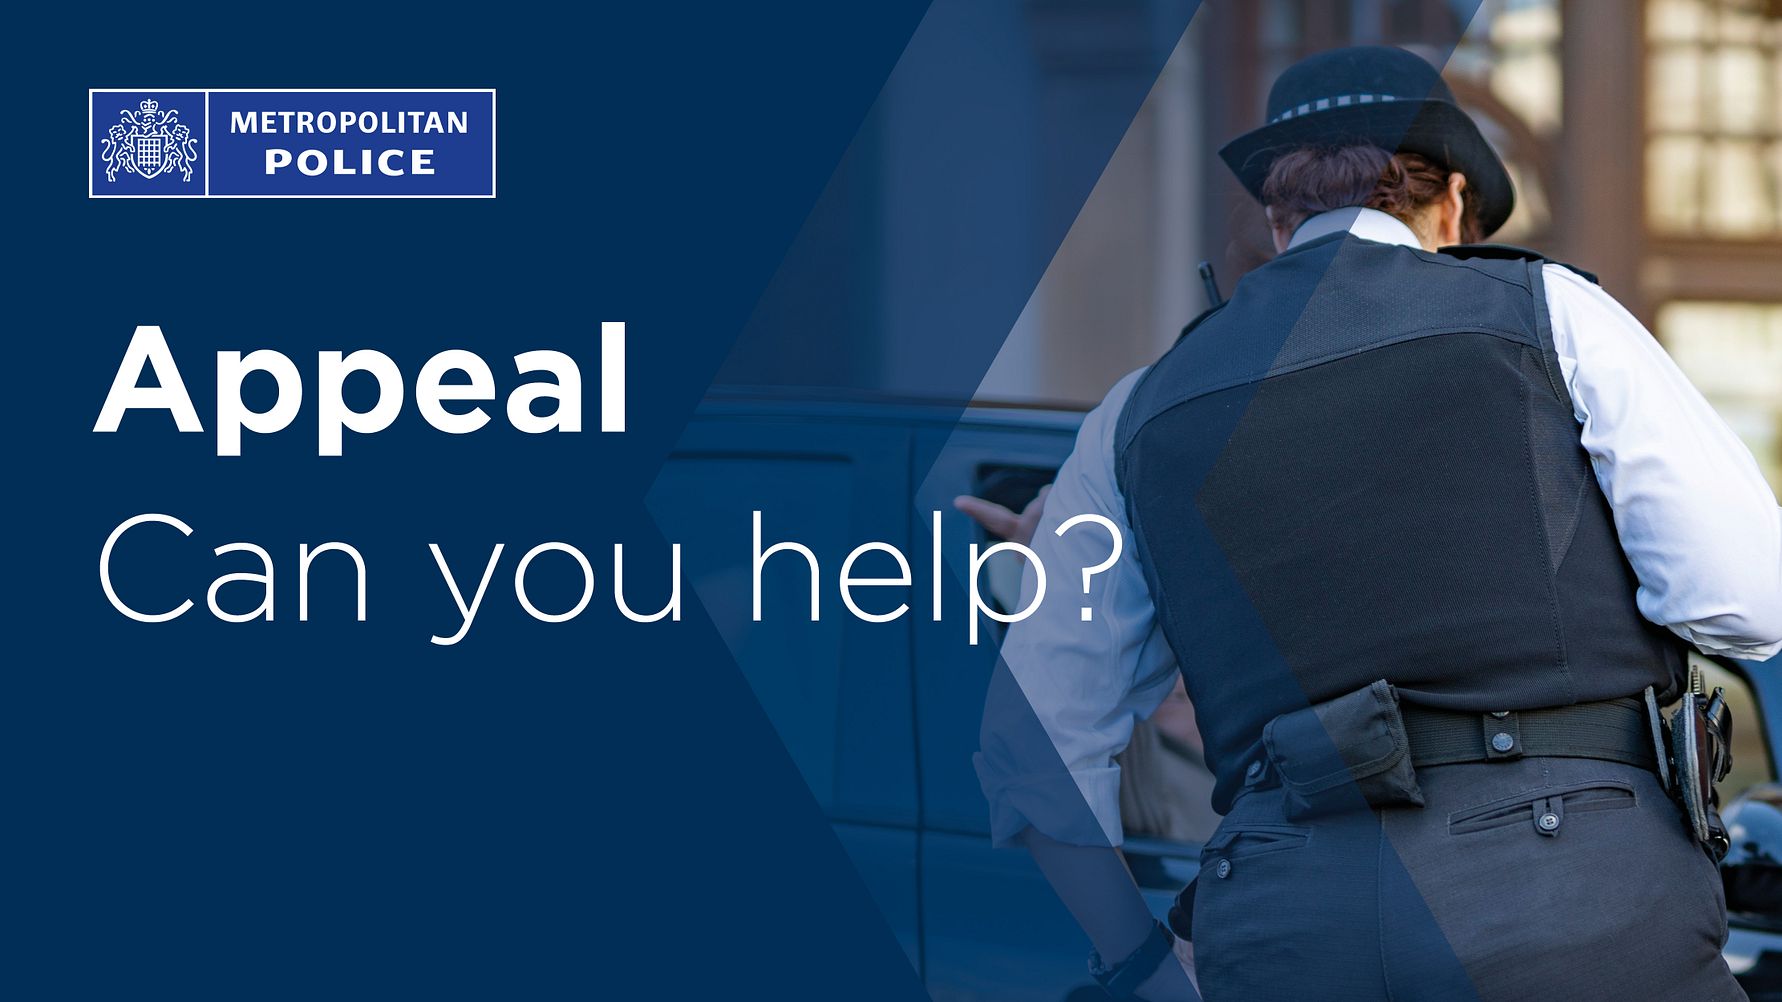 Appeal following serious collision in Bexleyheath